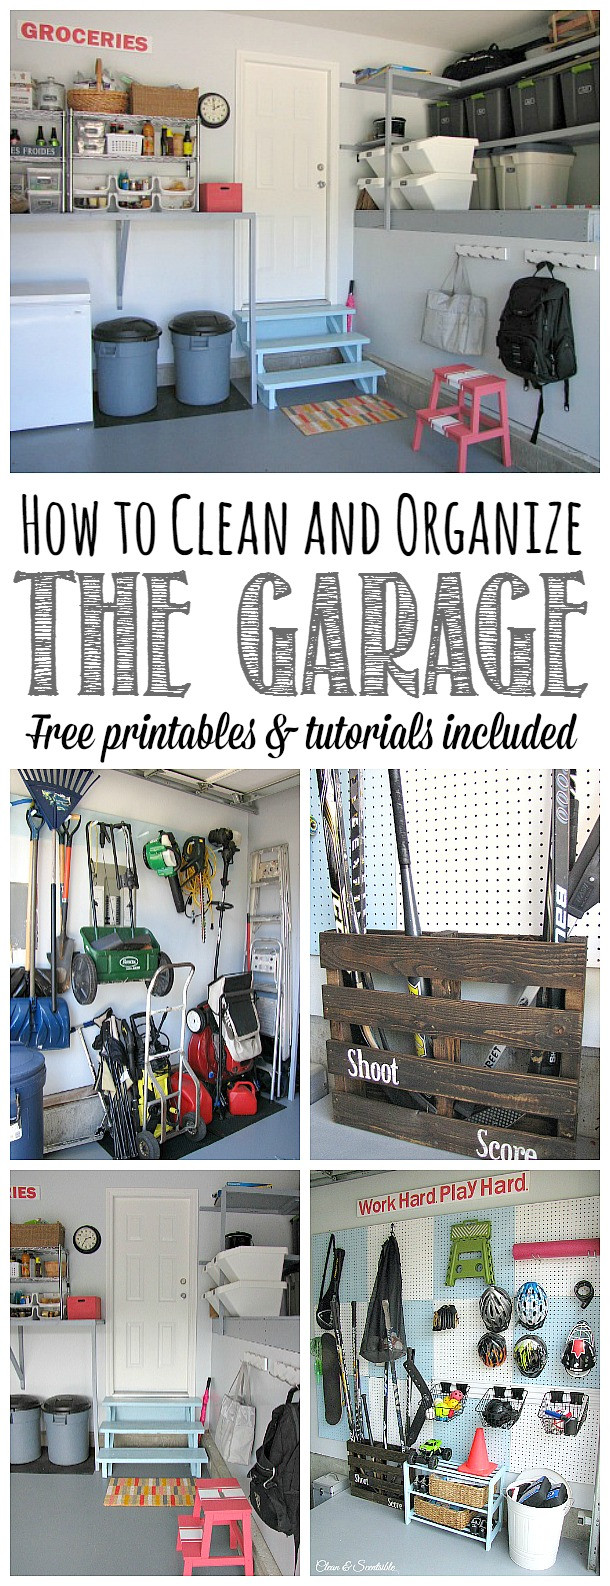 Garage Organizing Pinterest
 How to Organize the Garage Clean and Scentsible